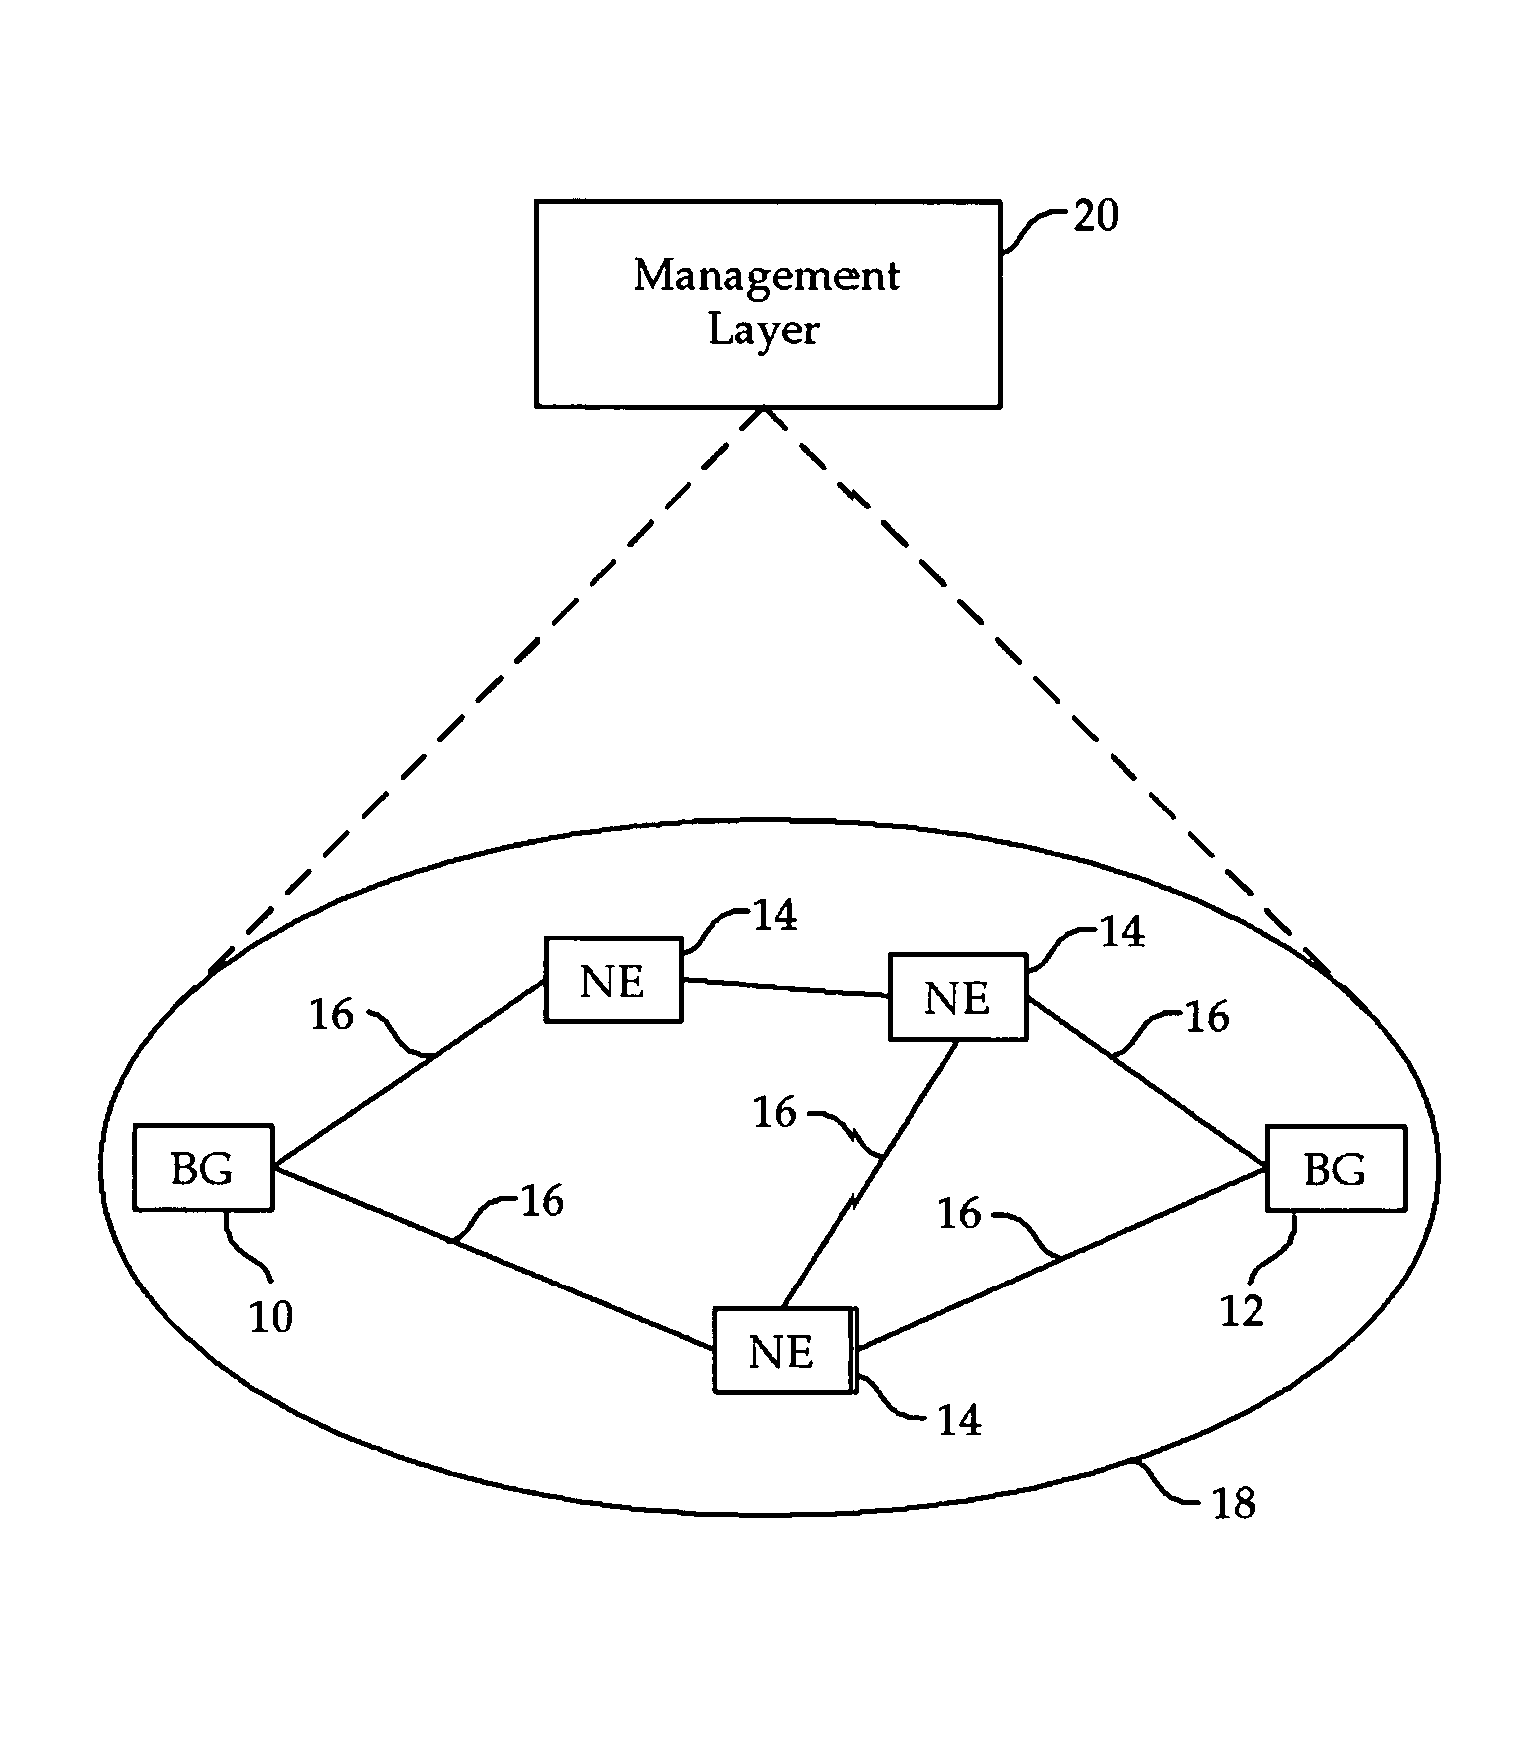 Open service discovery and routing mechanism for configuring cross-domain telecommunication services